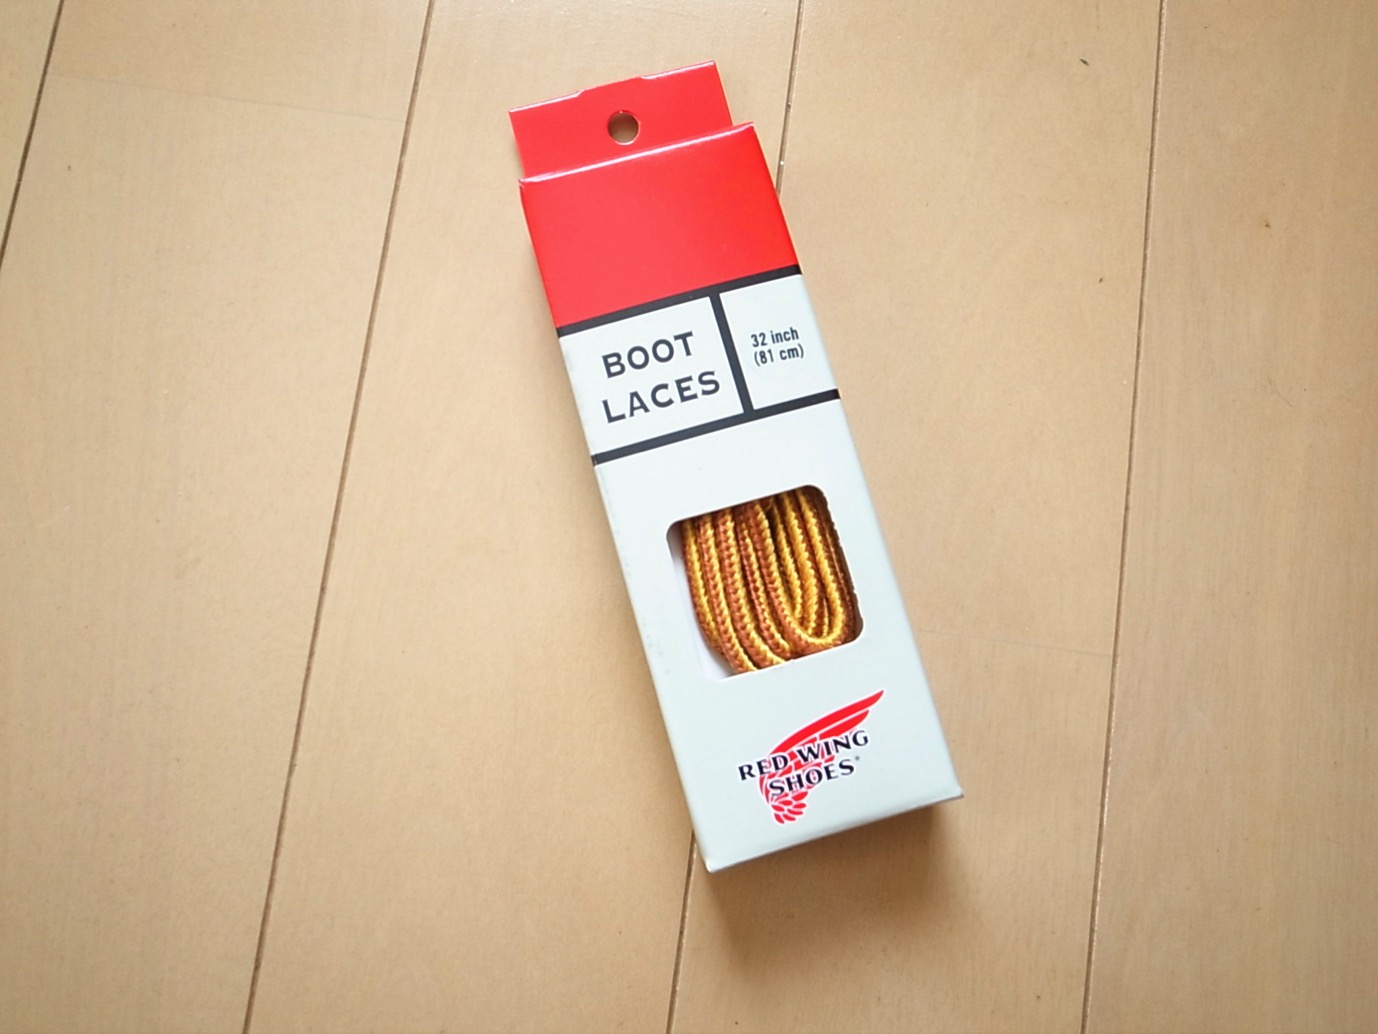 Redwing boot laces 1